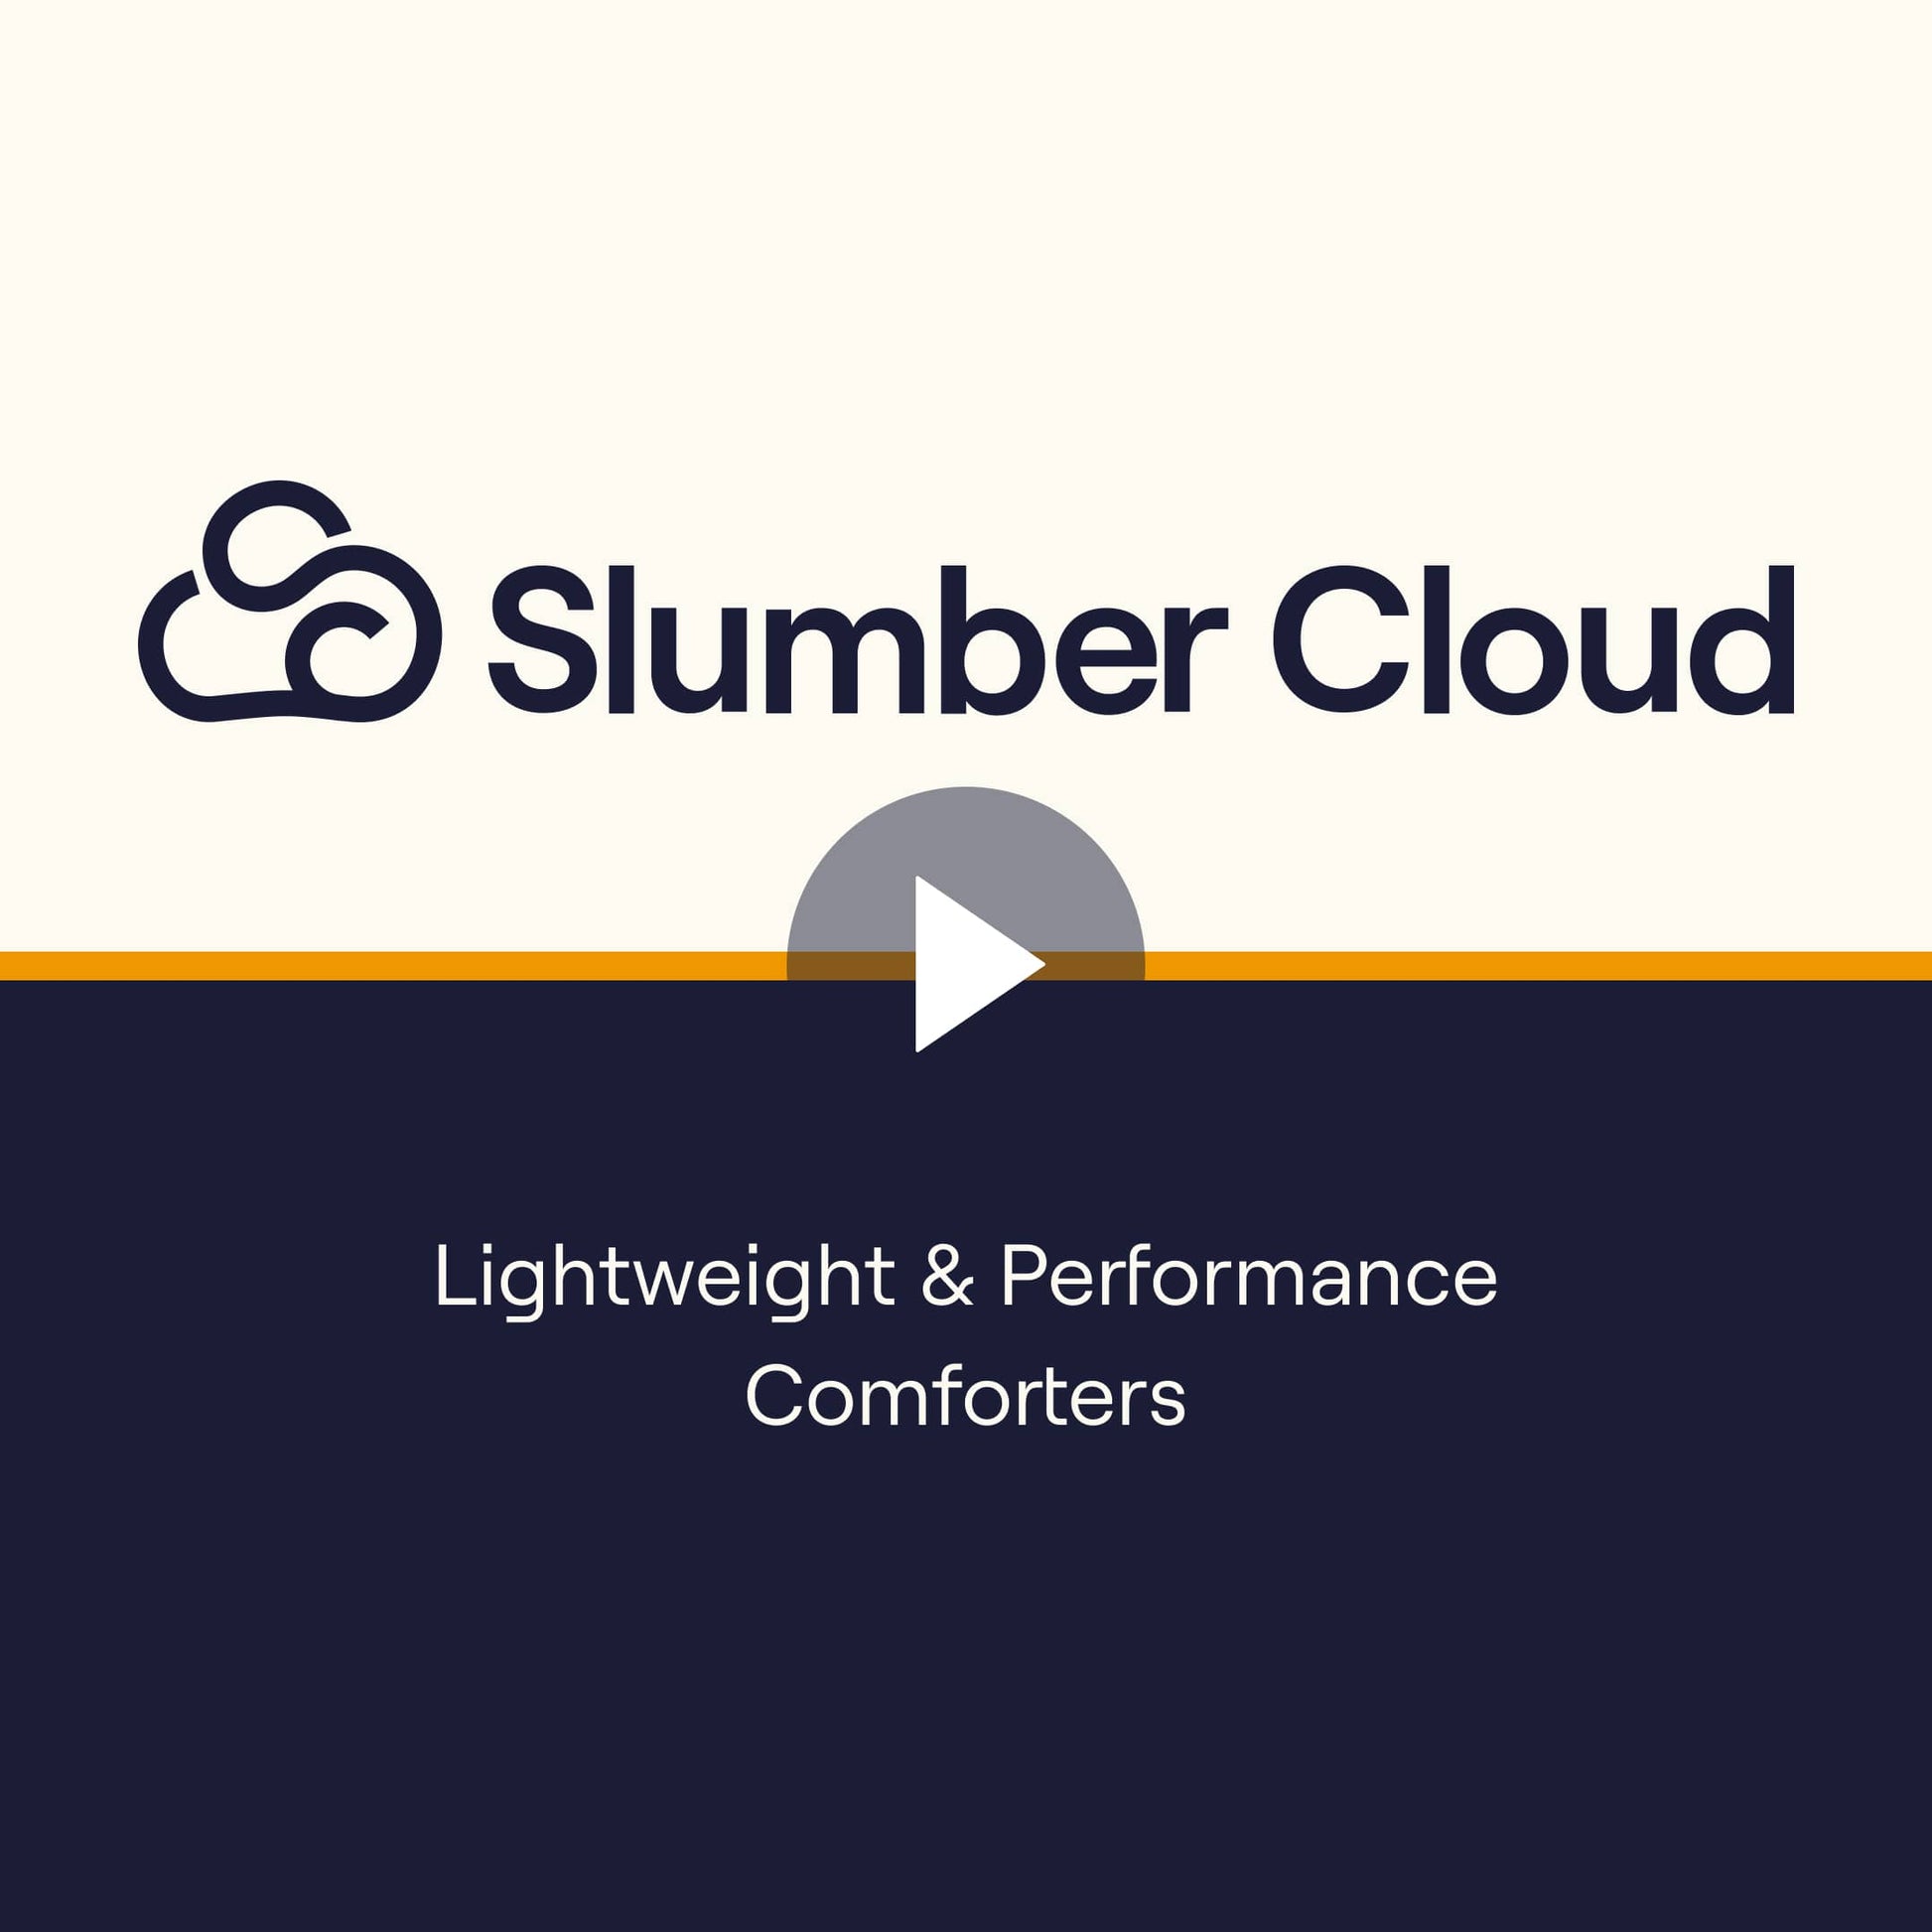 Video outlining the Slumber Cloud Lightweight and Performance Comforters made with Outlast temperature regulation technology to help you stay cool through the night. | Cooling Technology